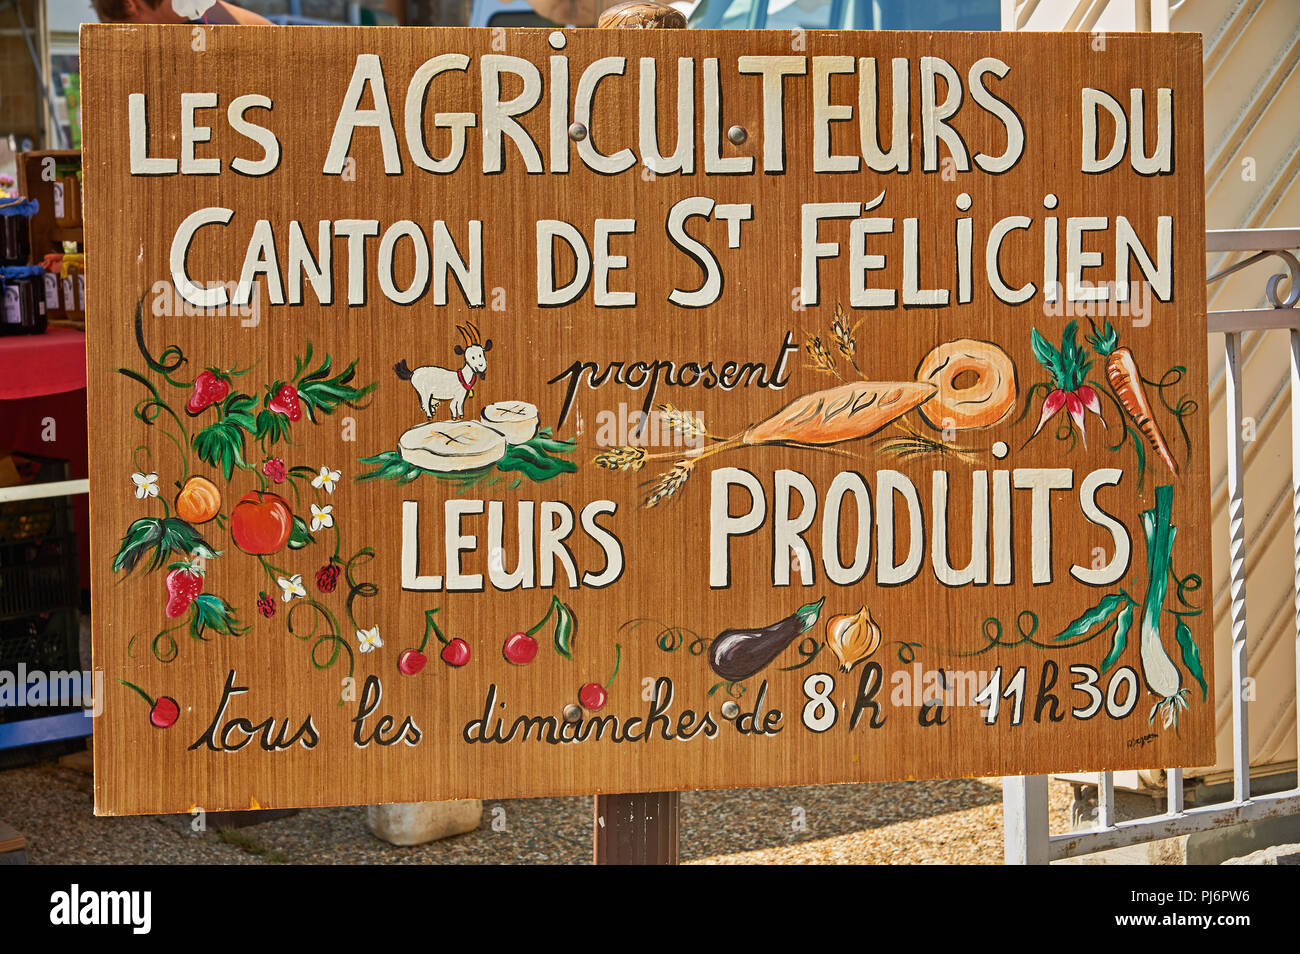 Saint Felicien Ardeche Rhone Alps France and a French language sign advertising a farmers market in the town. Stock Photo